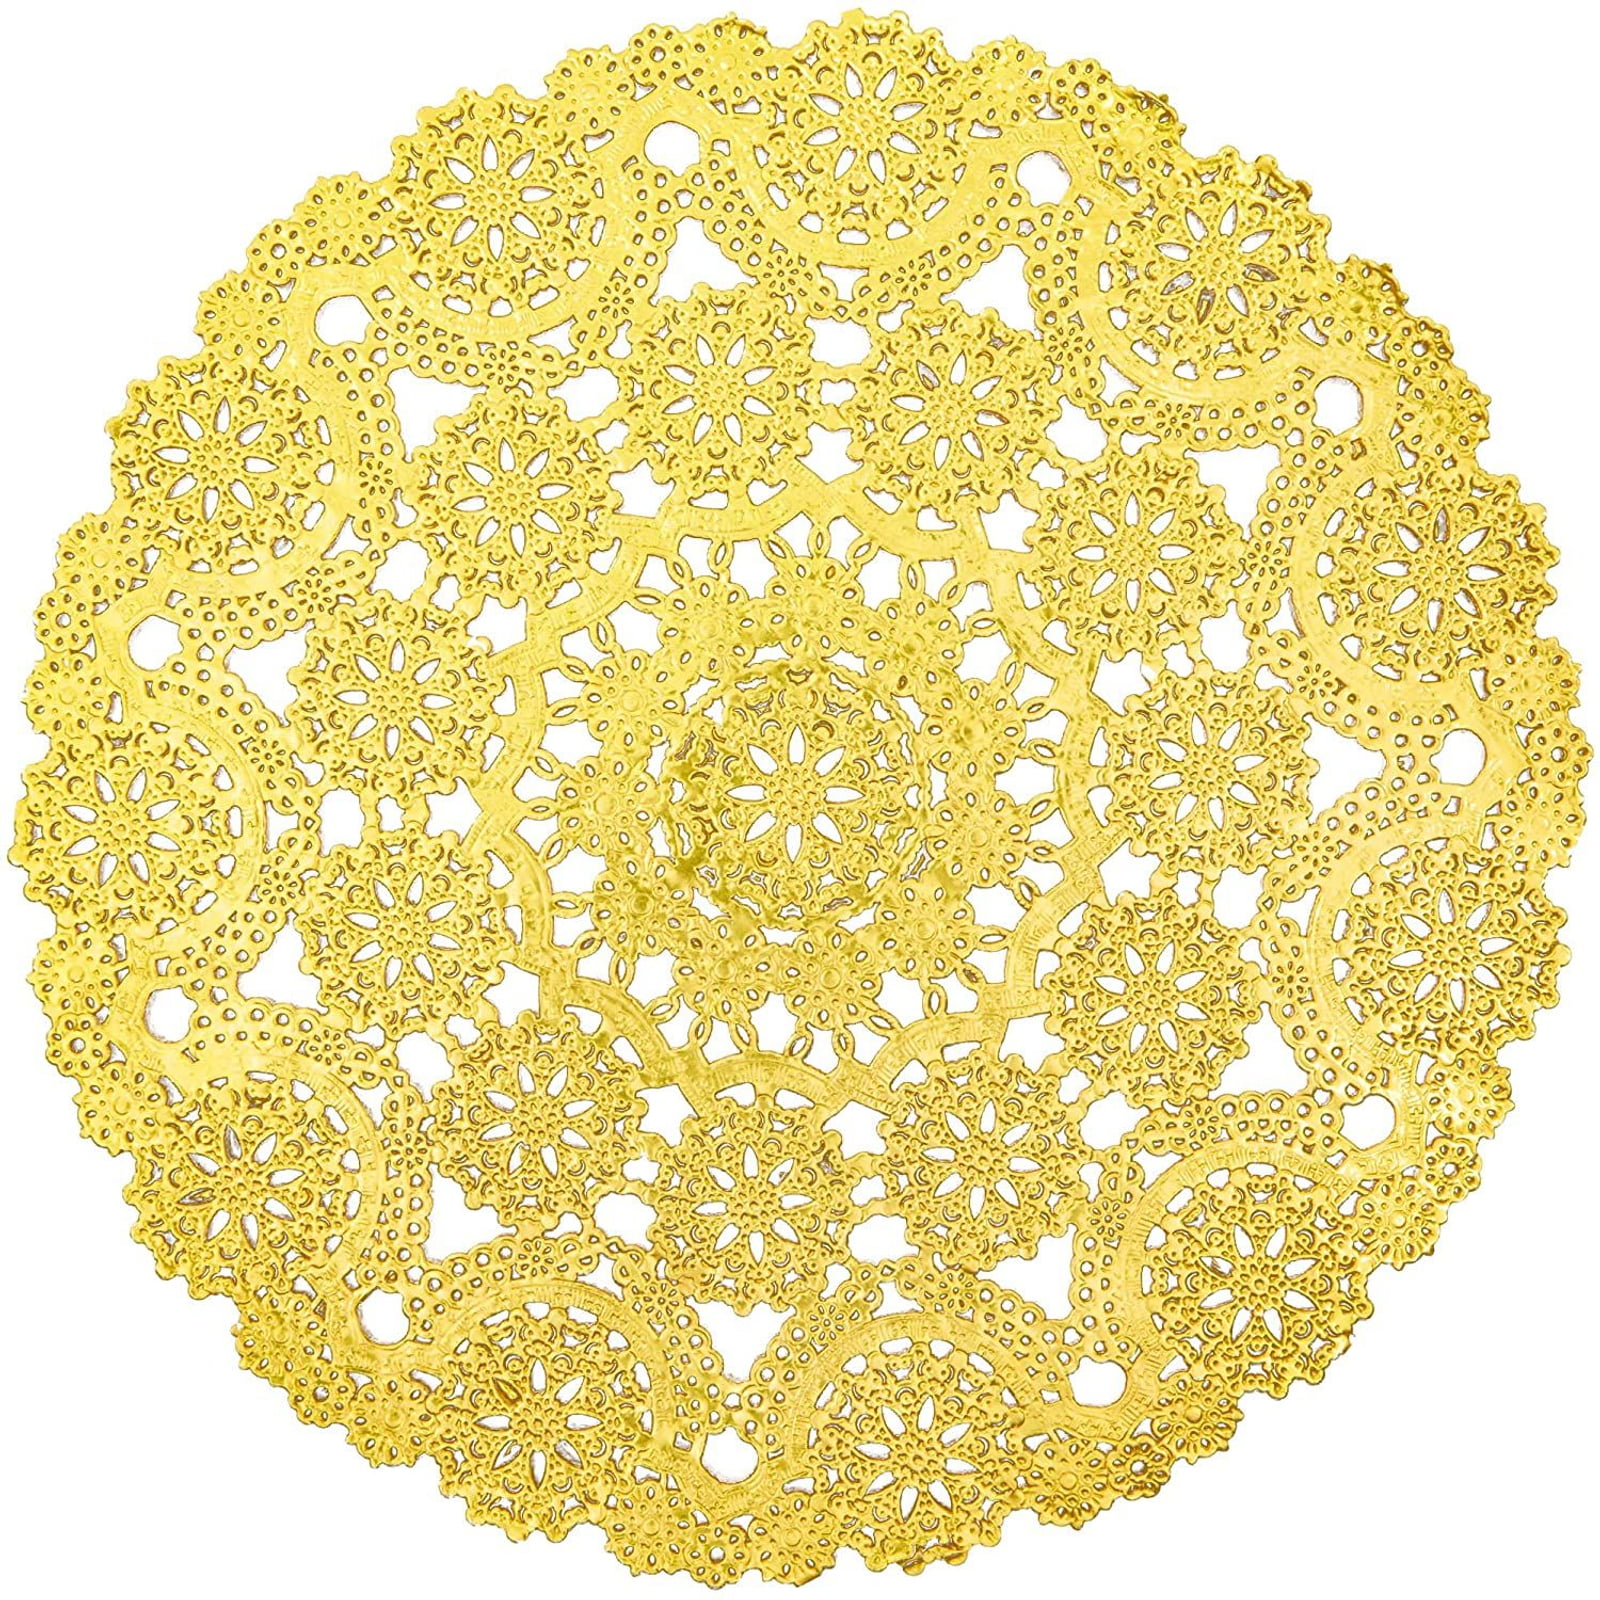 6 Pieces 12" Embroidery Handmade Jeweled Rhine Stones Doily Doilies Beige Gold 